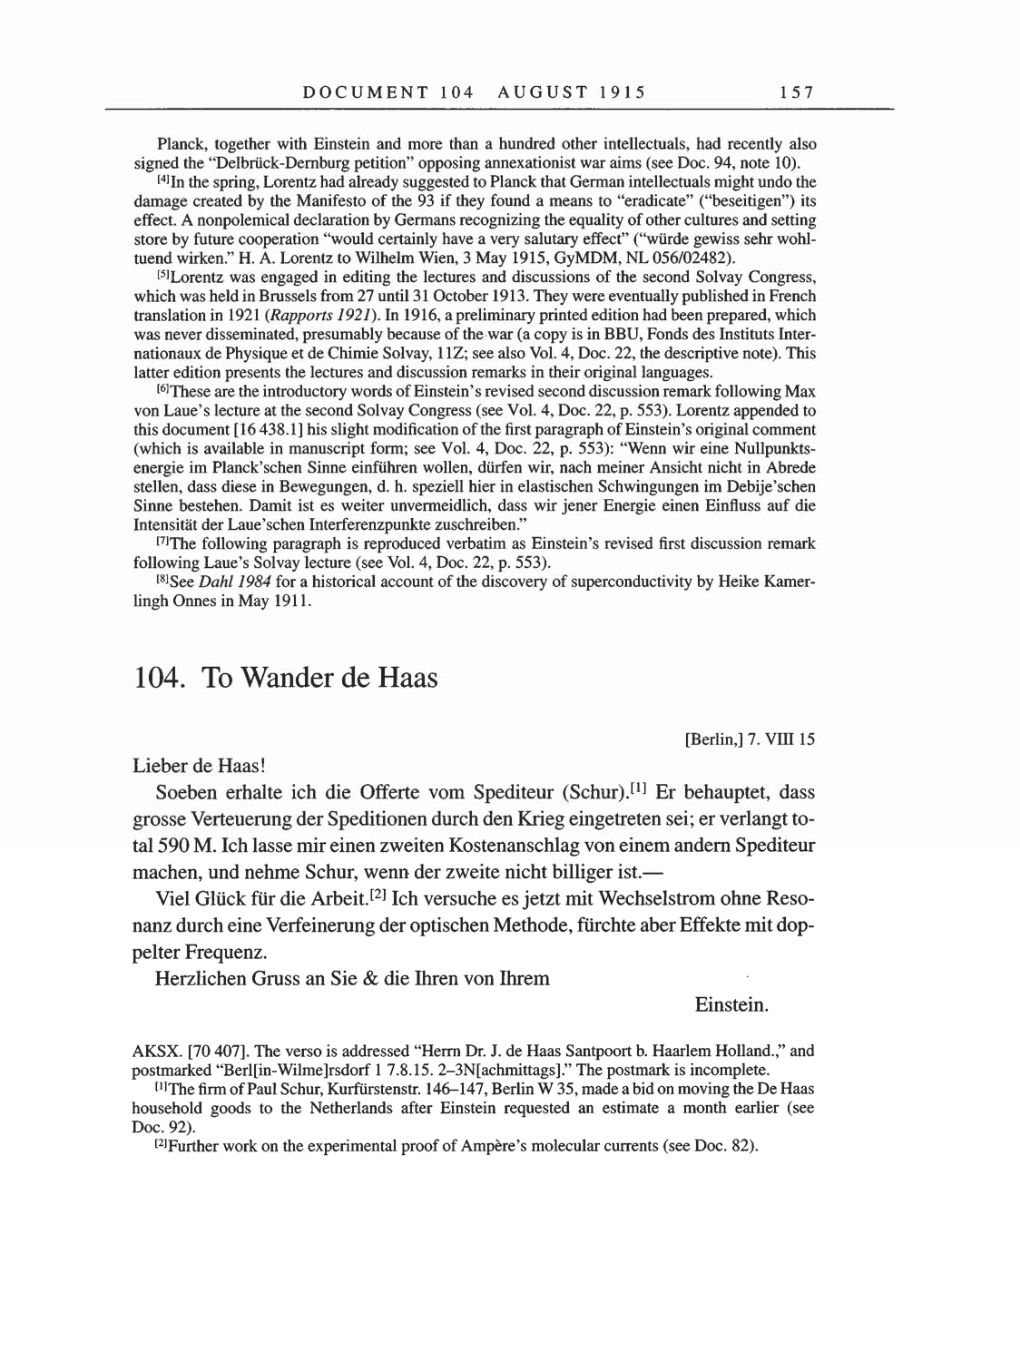 Volume 8, Part A: The Berlin Years: Correspondence 1914-1917 page 157